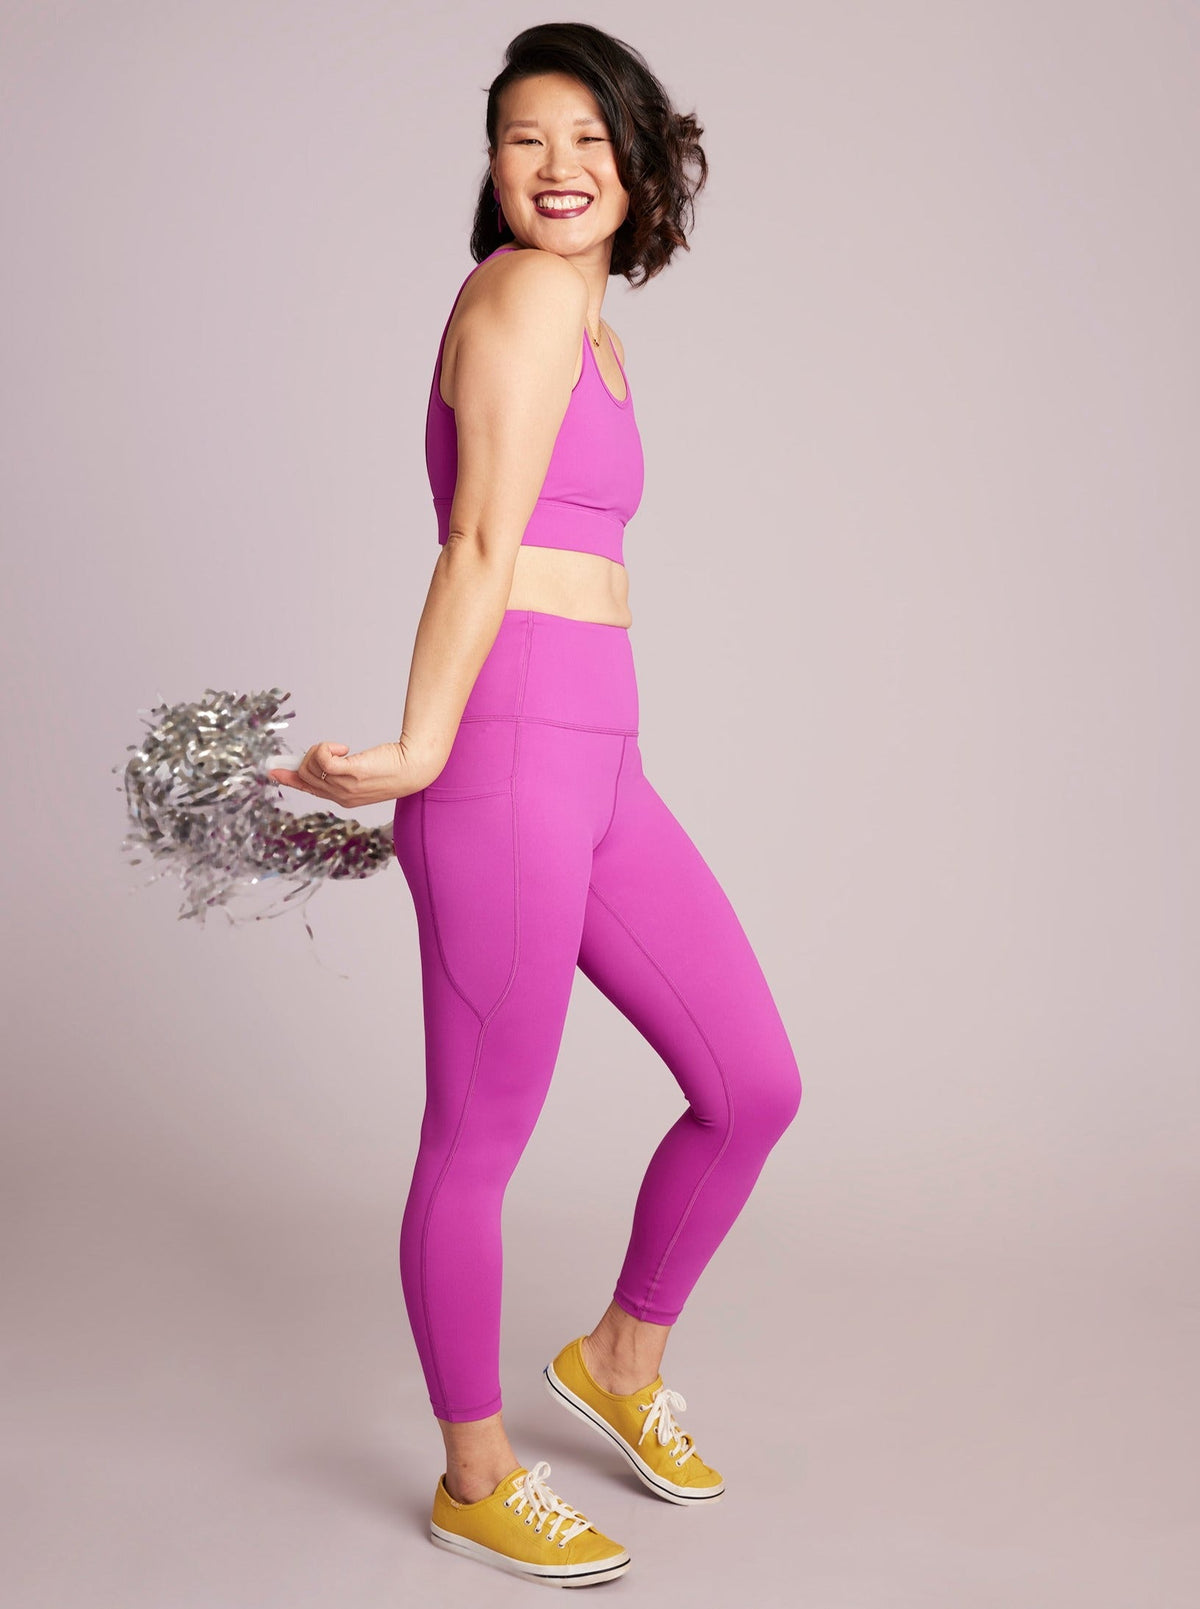 Magical Magenta Everyday Legging - 7/8 length - bright pink high waisted leggings with pockets